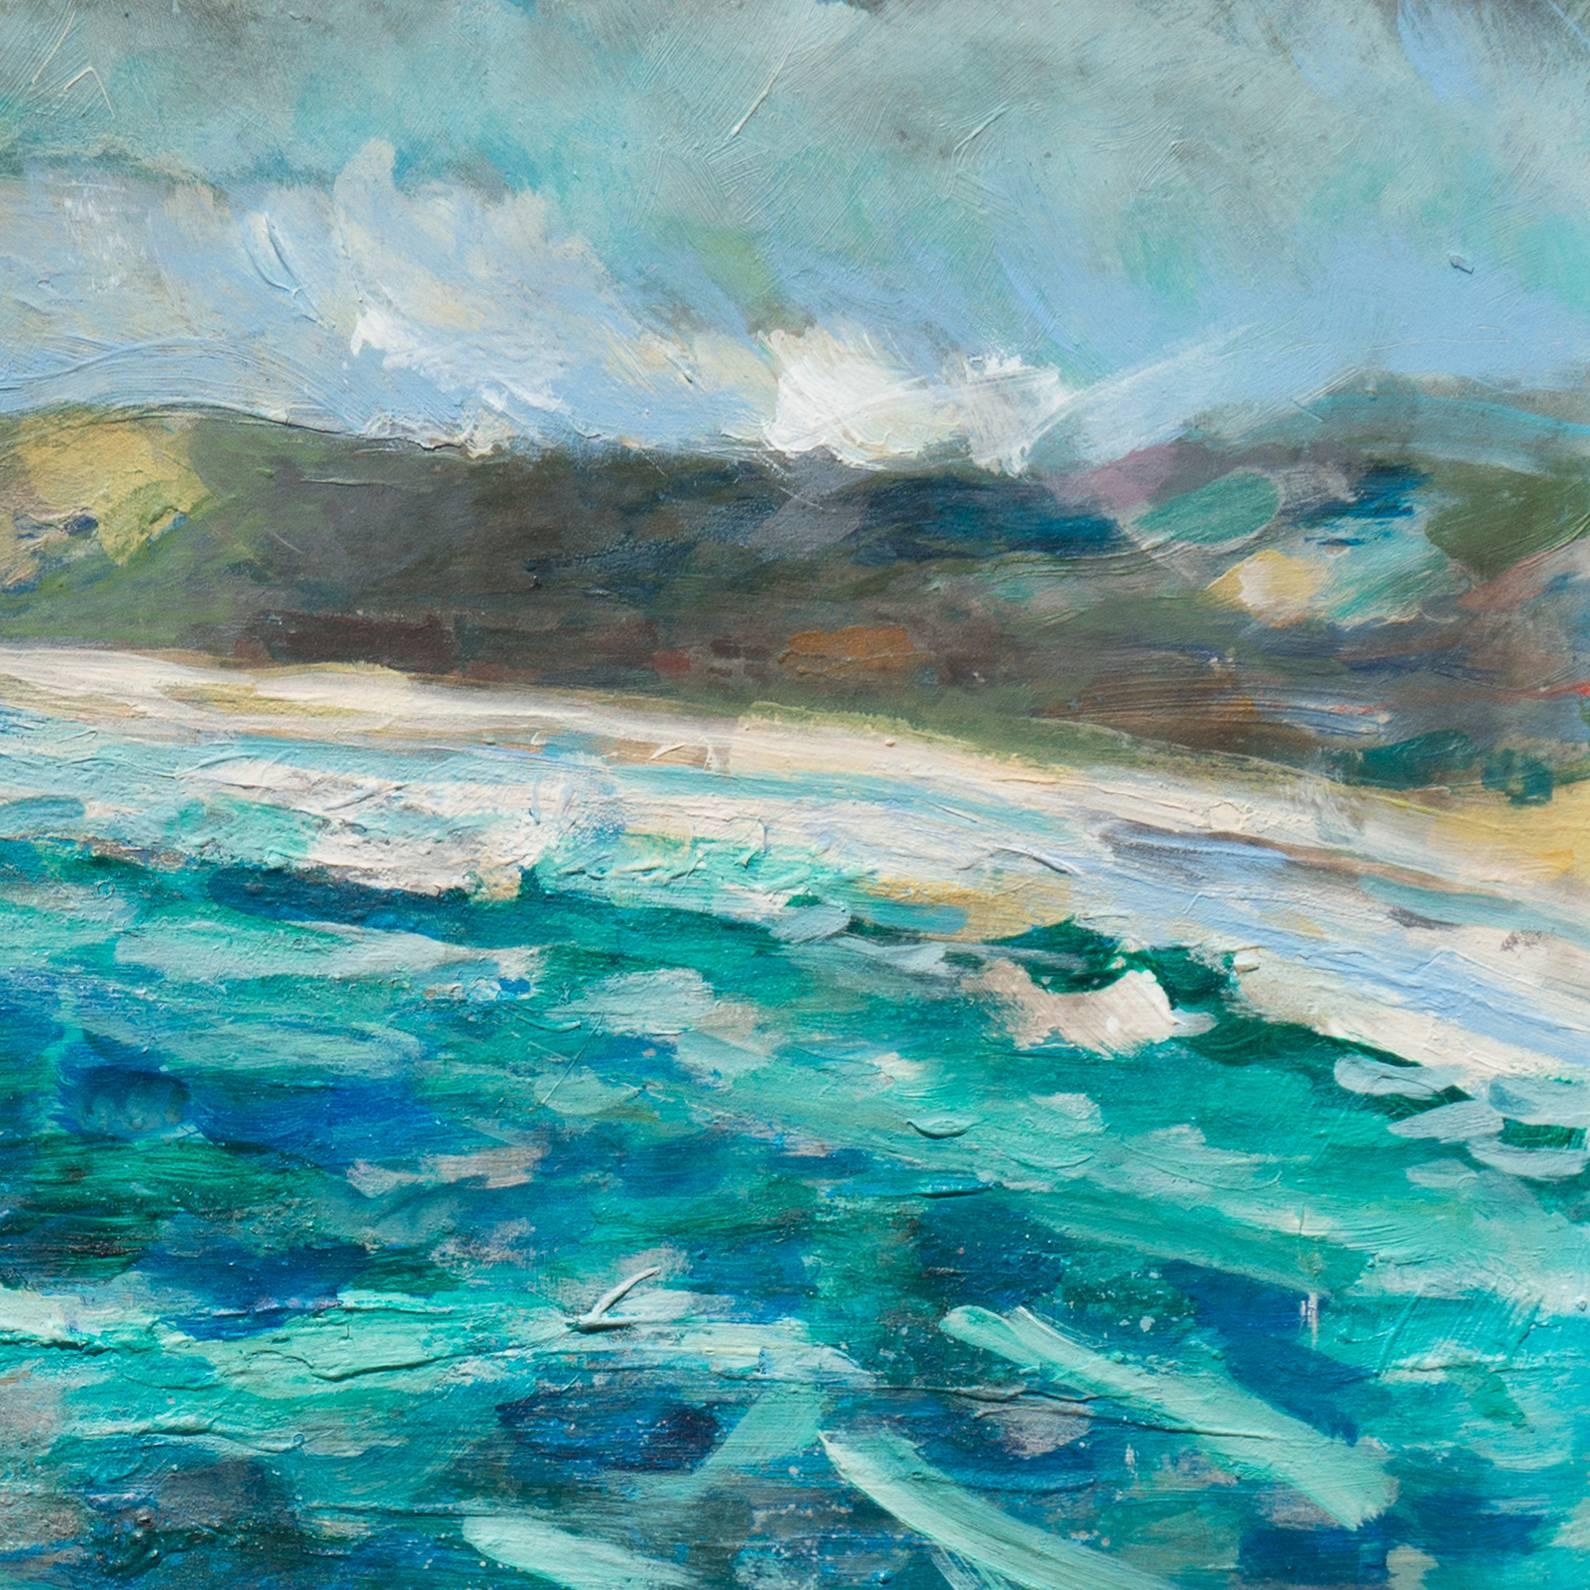 Monterey Bay - Expressionist Painting by Robert Canete